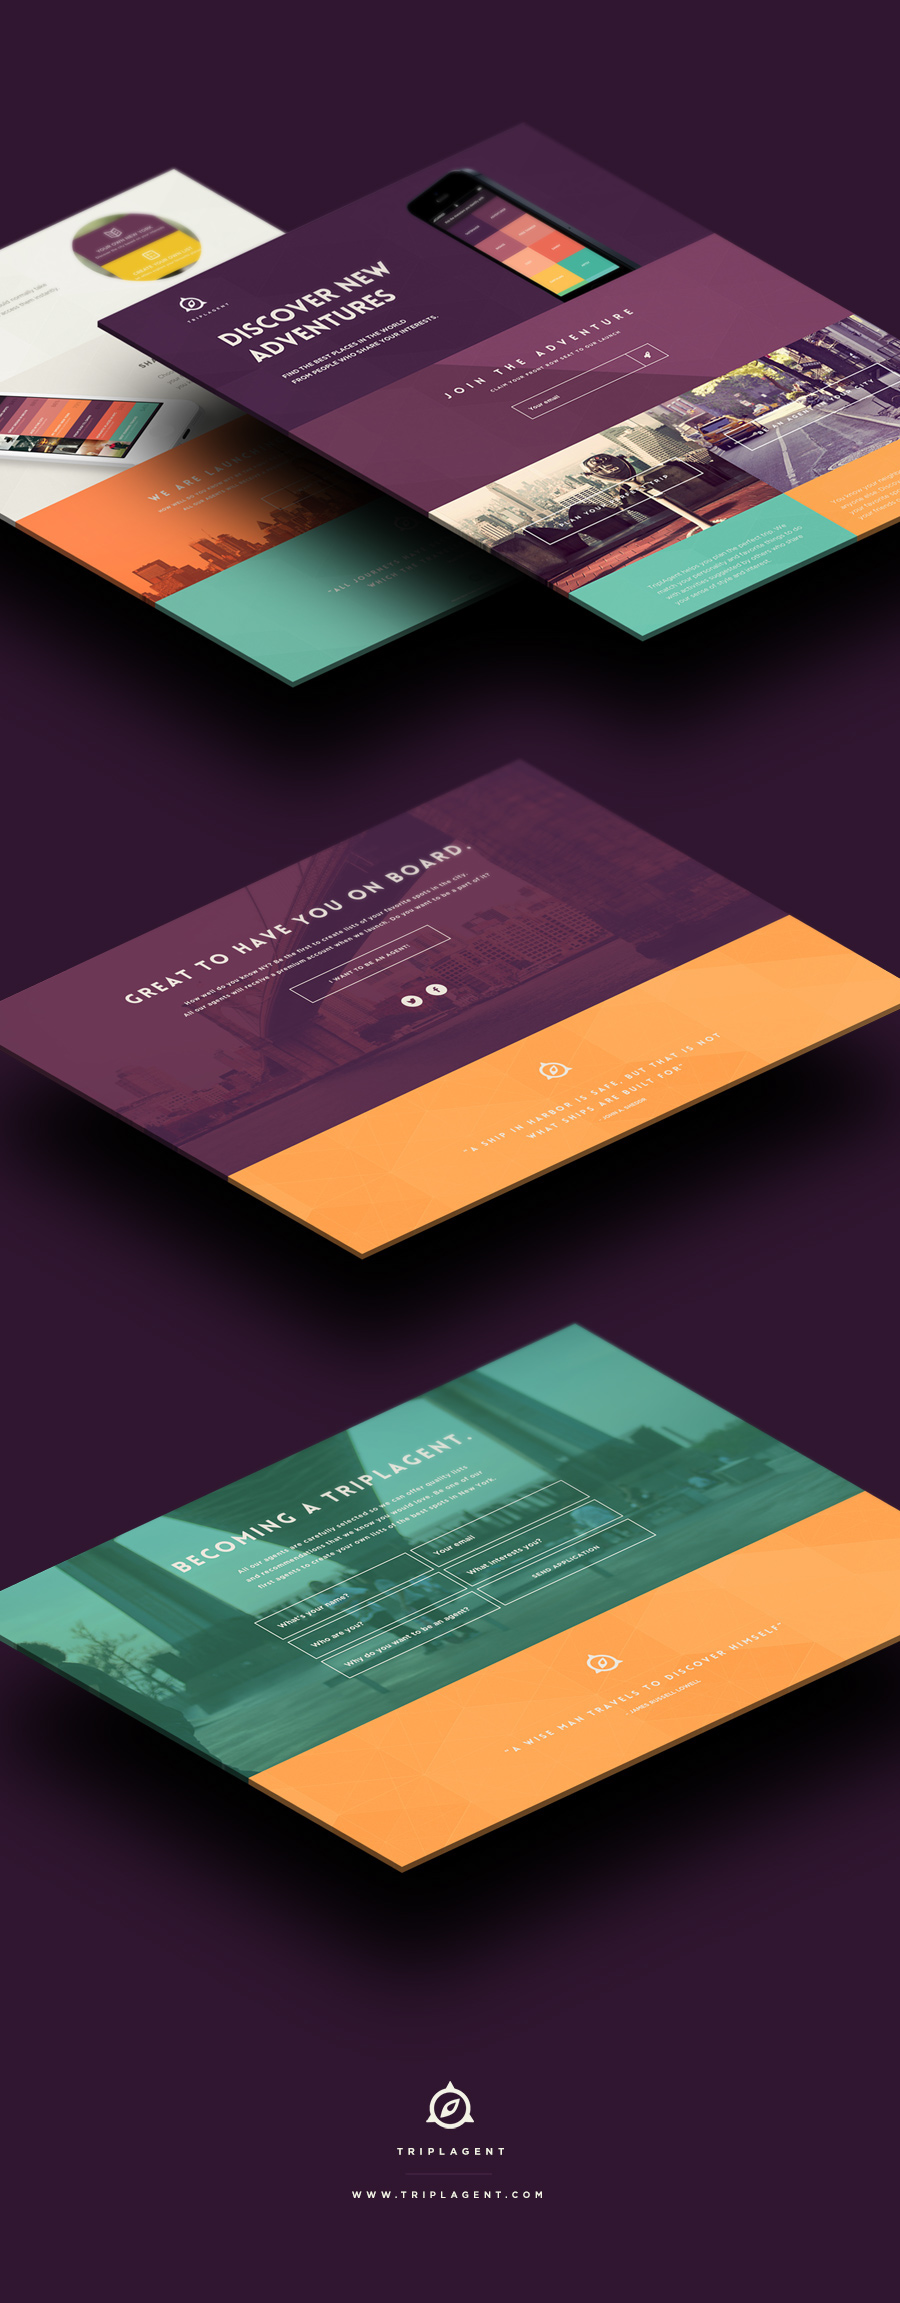 flat ui  mobile app colorful Travel brand identity user experience